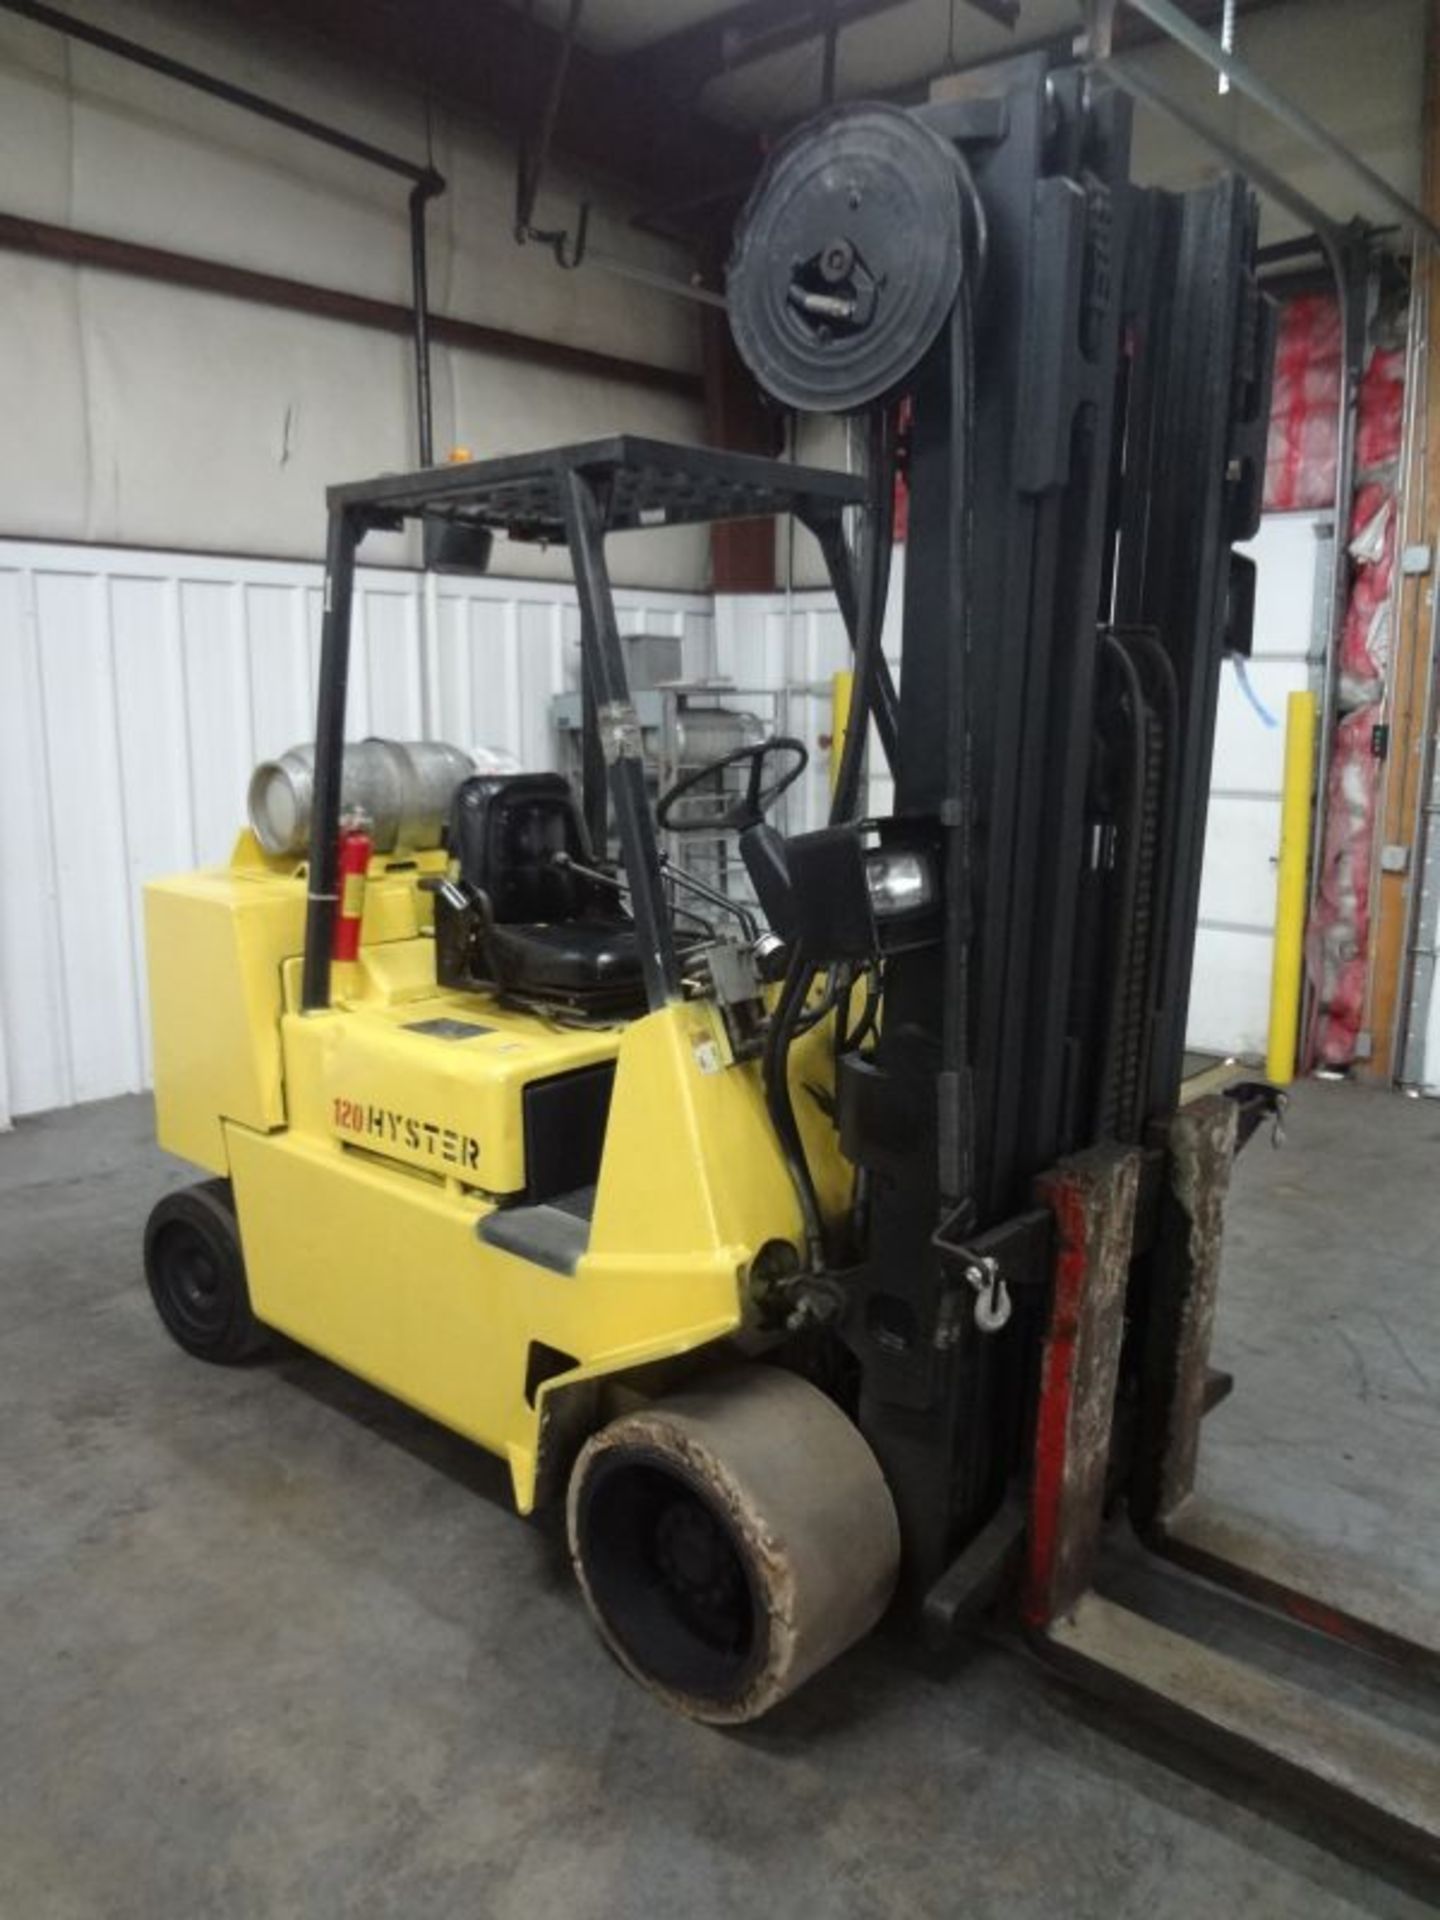 12,000 LB. HYSTER MODEL S120XLS CUSHION TIRE LP GAS LIFT TRUCK; S/N D004V09765S, 6,567 HOURS - Image 2 of 8